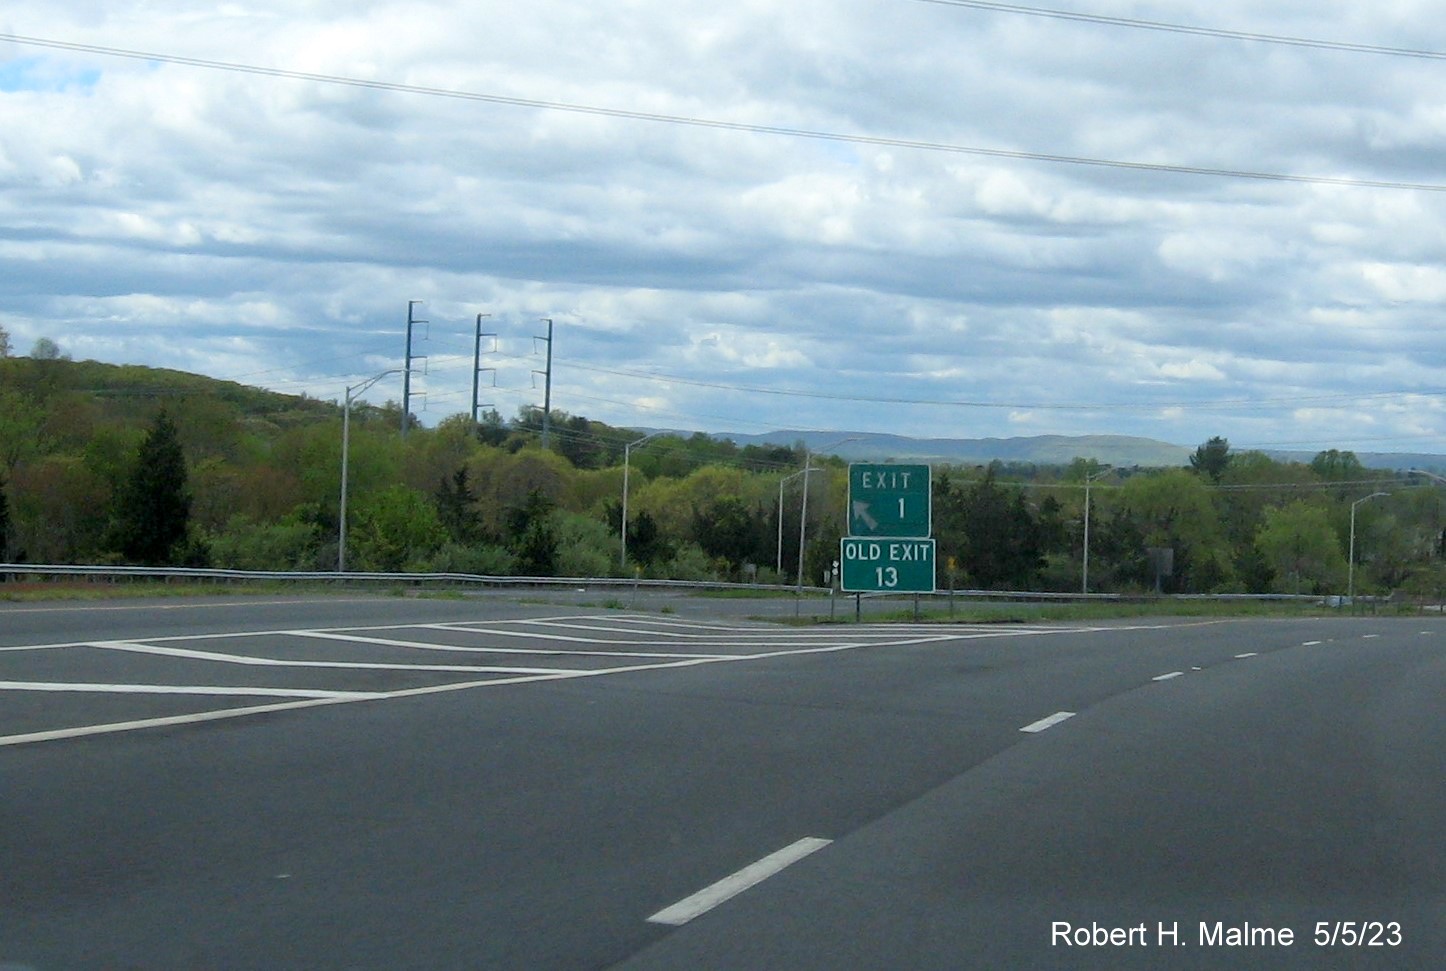 Image of gore sign for East Main Street exit with new milepost based exit number and Old Exit 13 sign below on CT 66 West in Meriden, May 2023